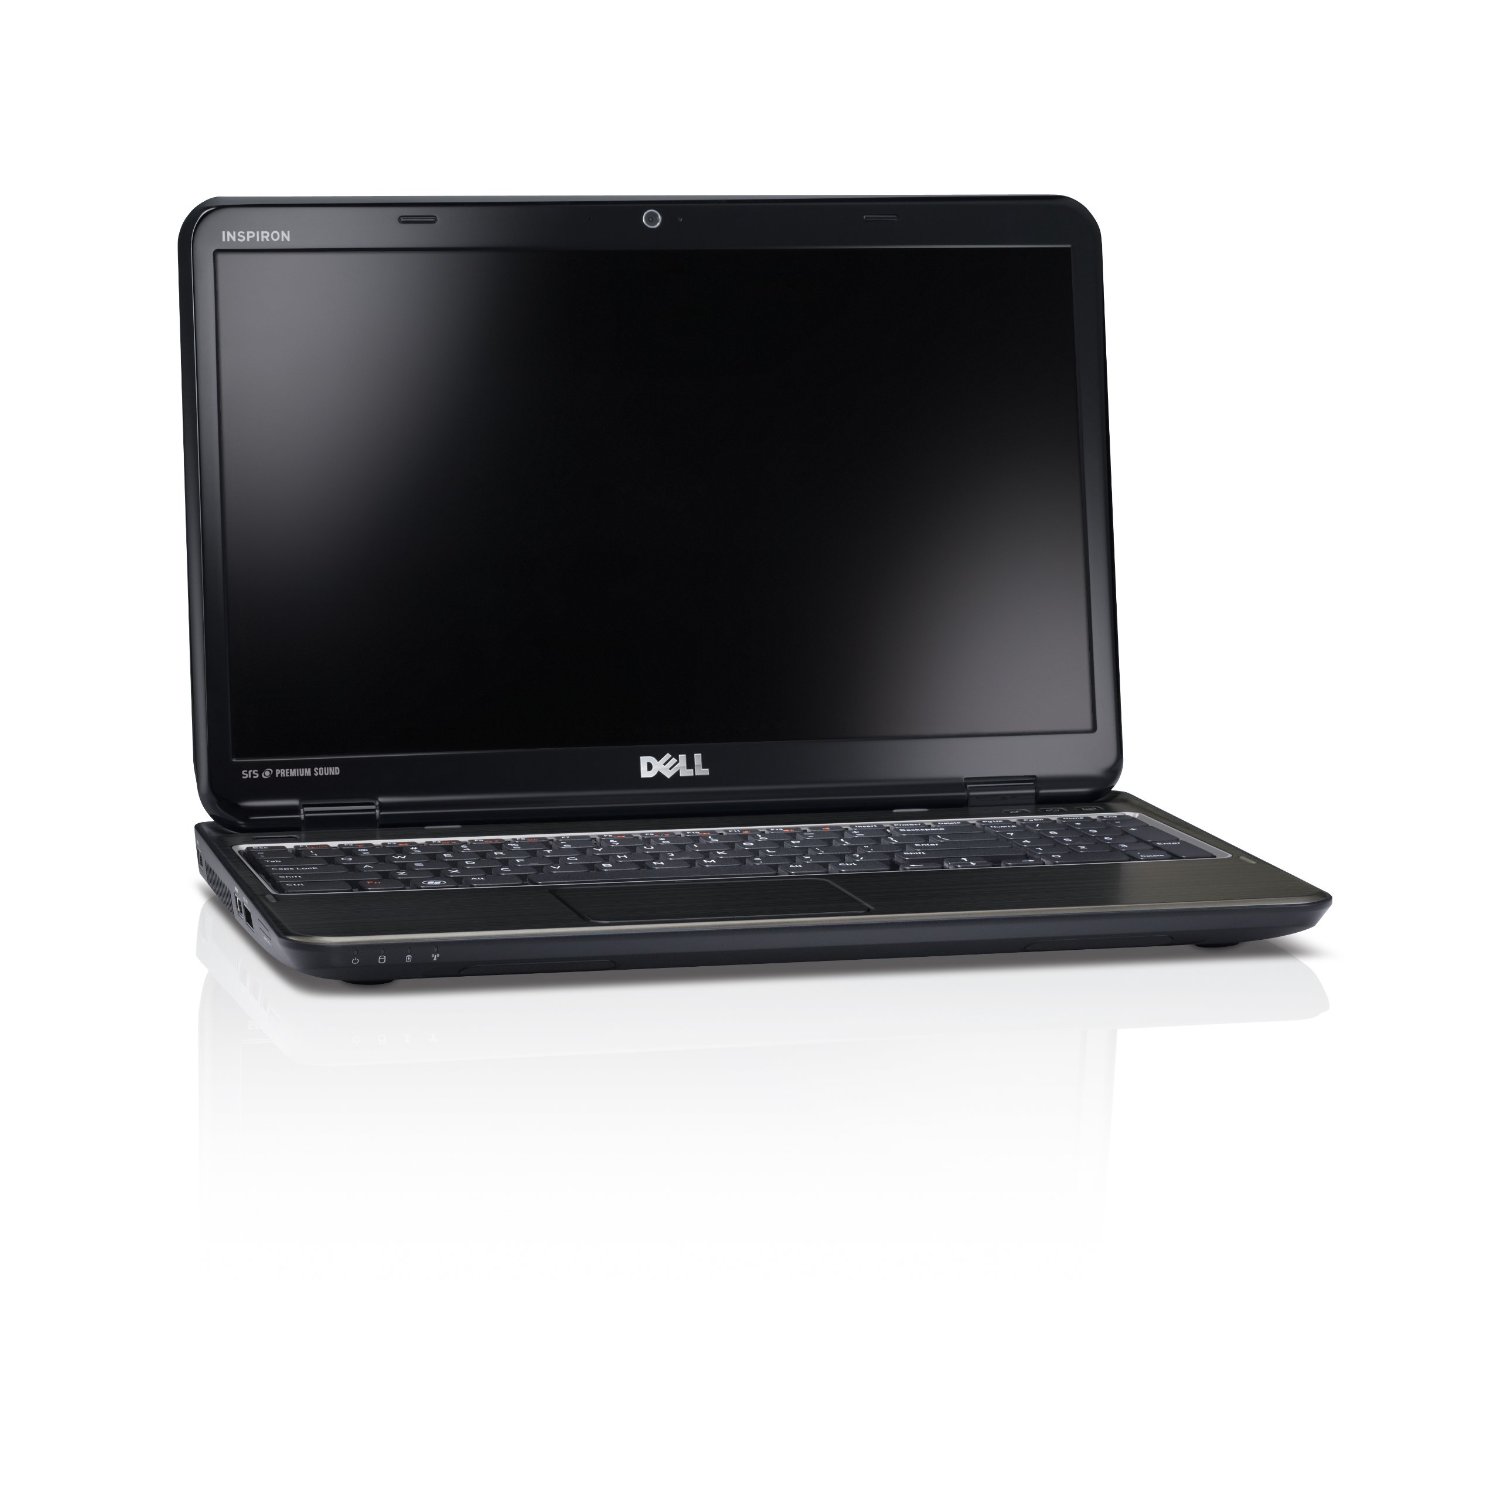 http://thetechjournal.com/wp-content/uploads/images/1111/1321531751-dell-inspiron-15rn-i15rn7059dbk-156inch-laptop-7.jpg